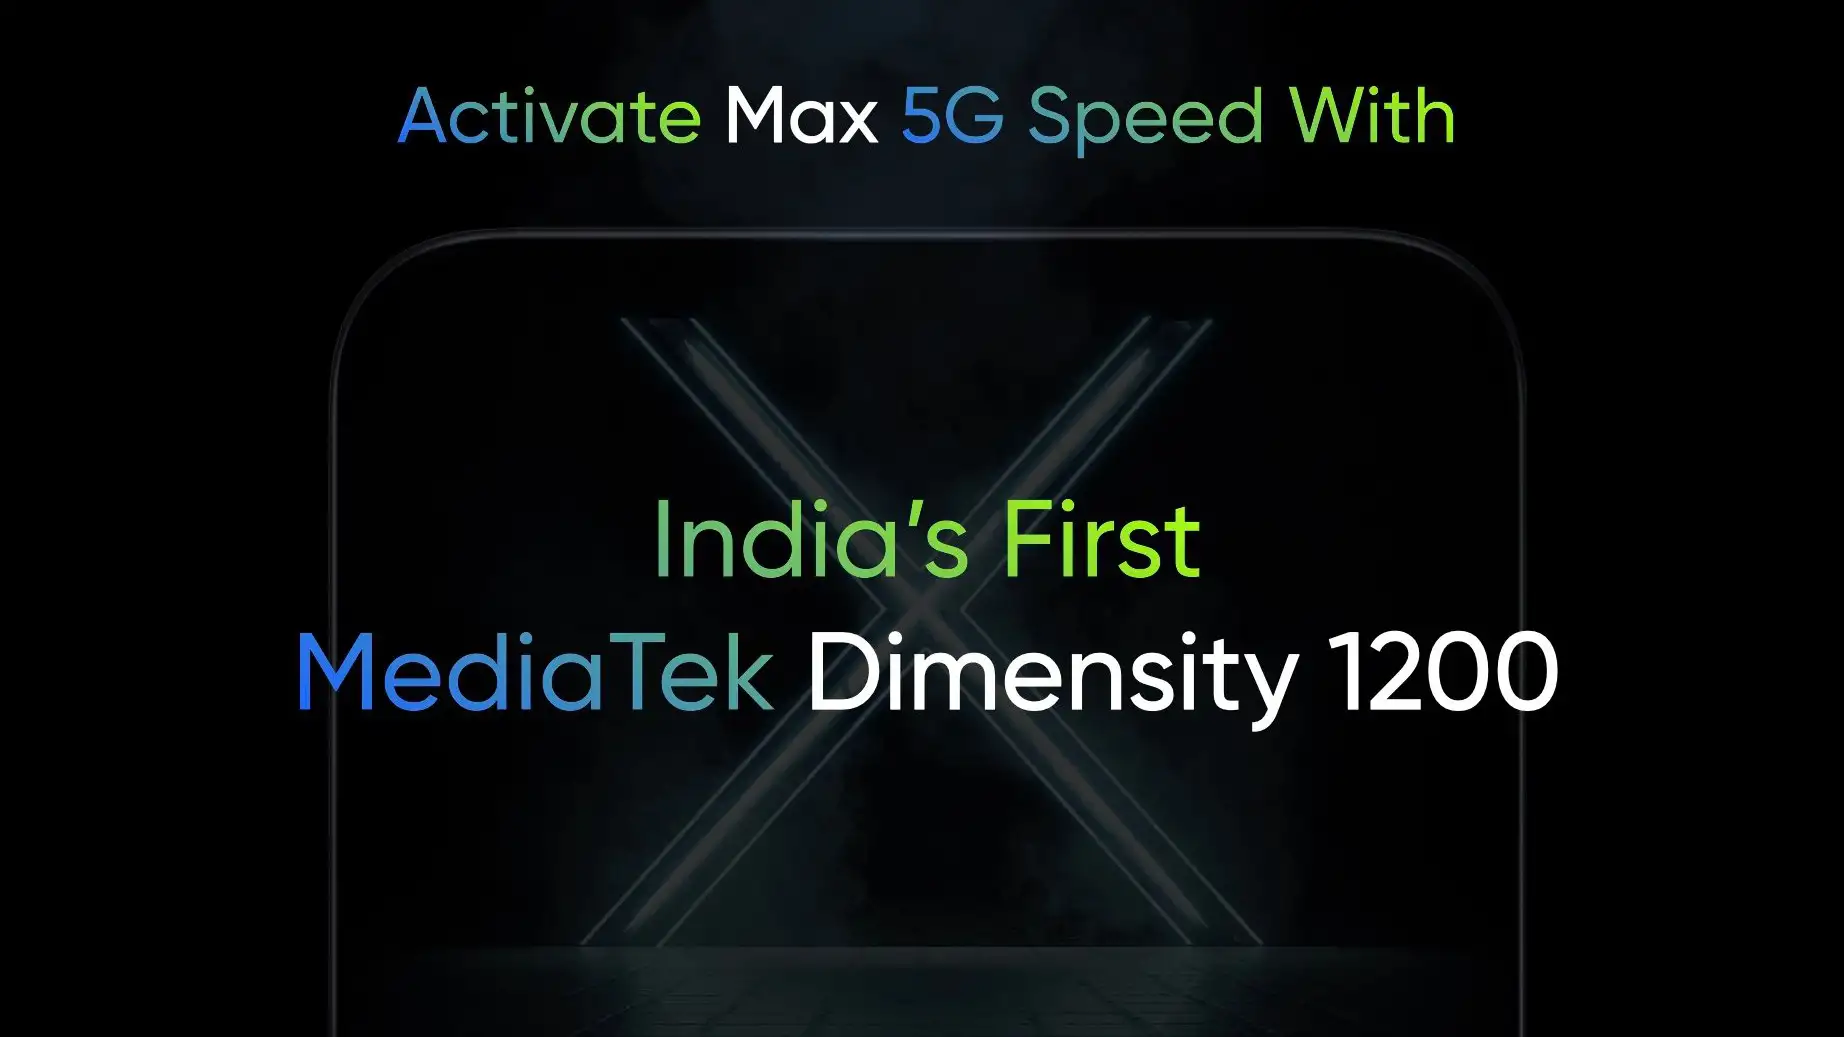 Realme GT Neo may be launch in India rebranded as Realme X7 Max 5G